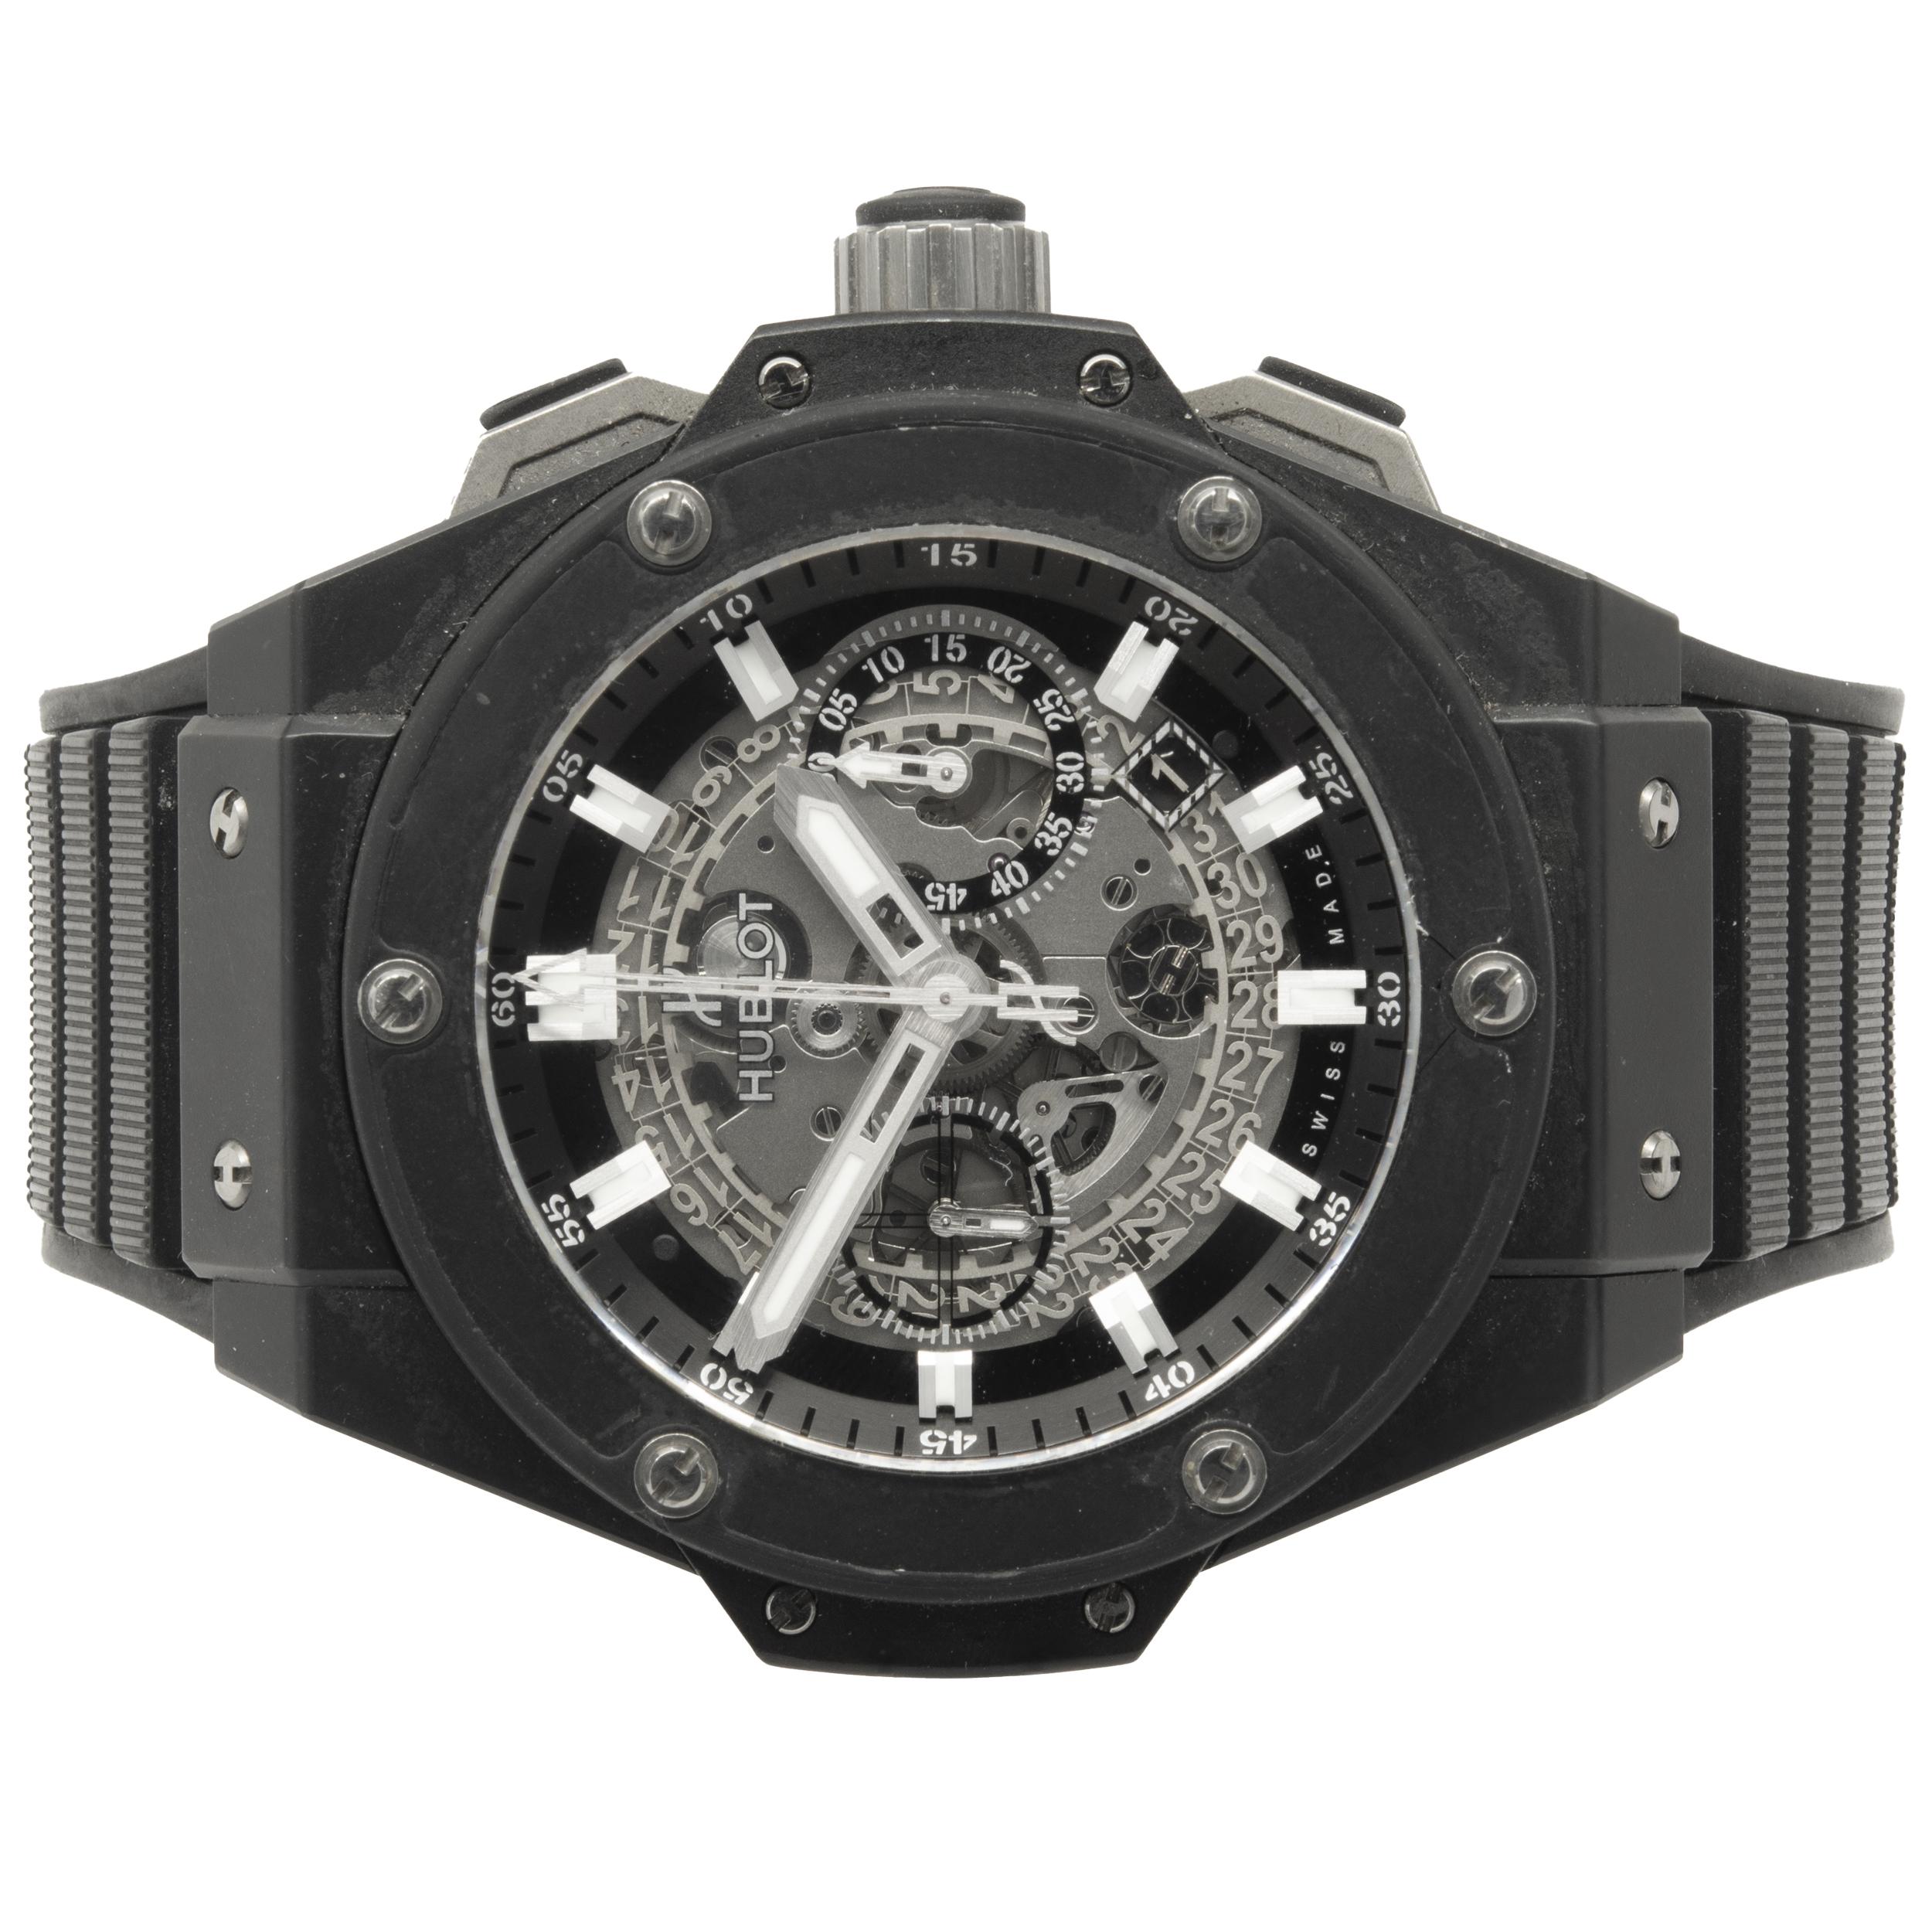 Movement:  Swiss, automatic, HUB1240
Function: hours, minutes, sweep seconds, chrono, date at 4:30
Case: 48mm black ceramic case and bezel, water resistant to 100 meters
Band: black rubber Hublot strap, black ceramic PVD/titanium deployment clasp,